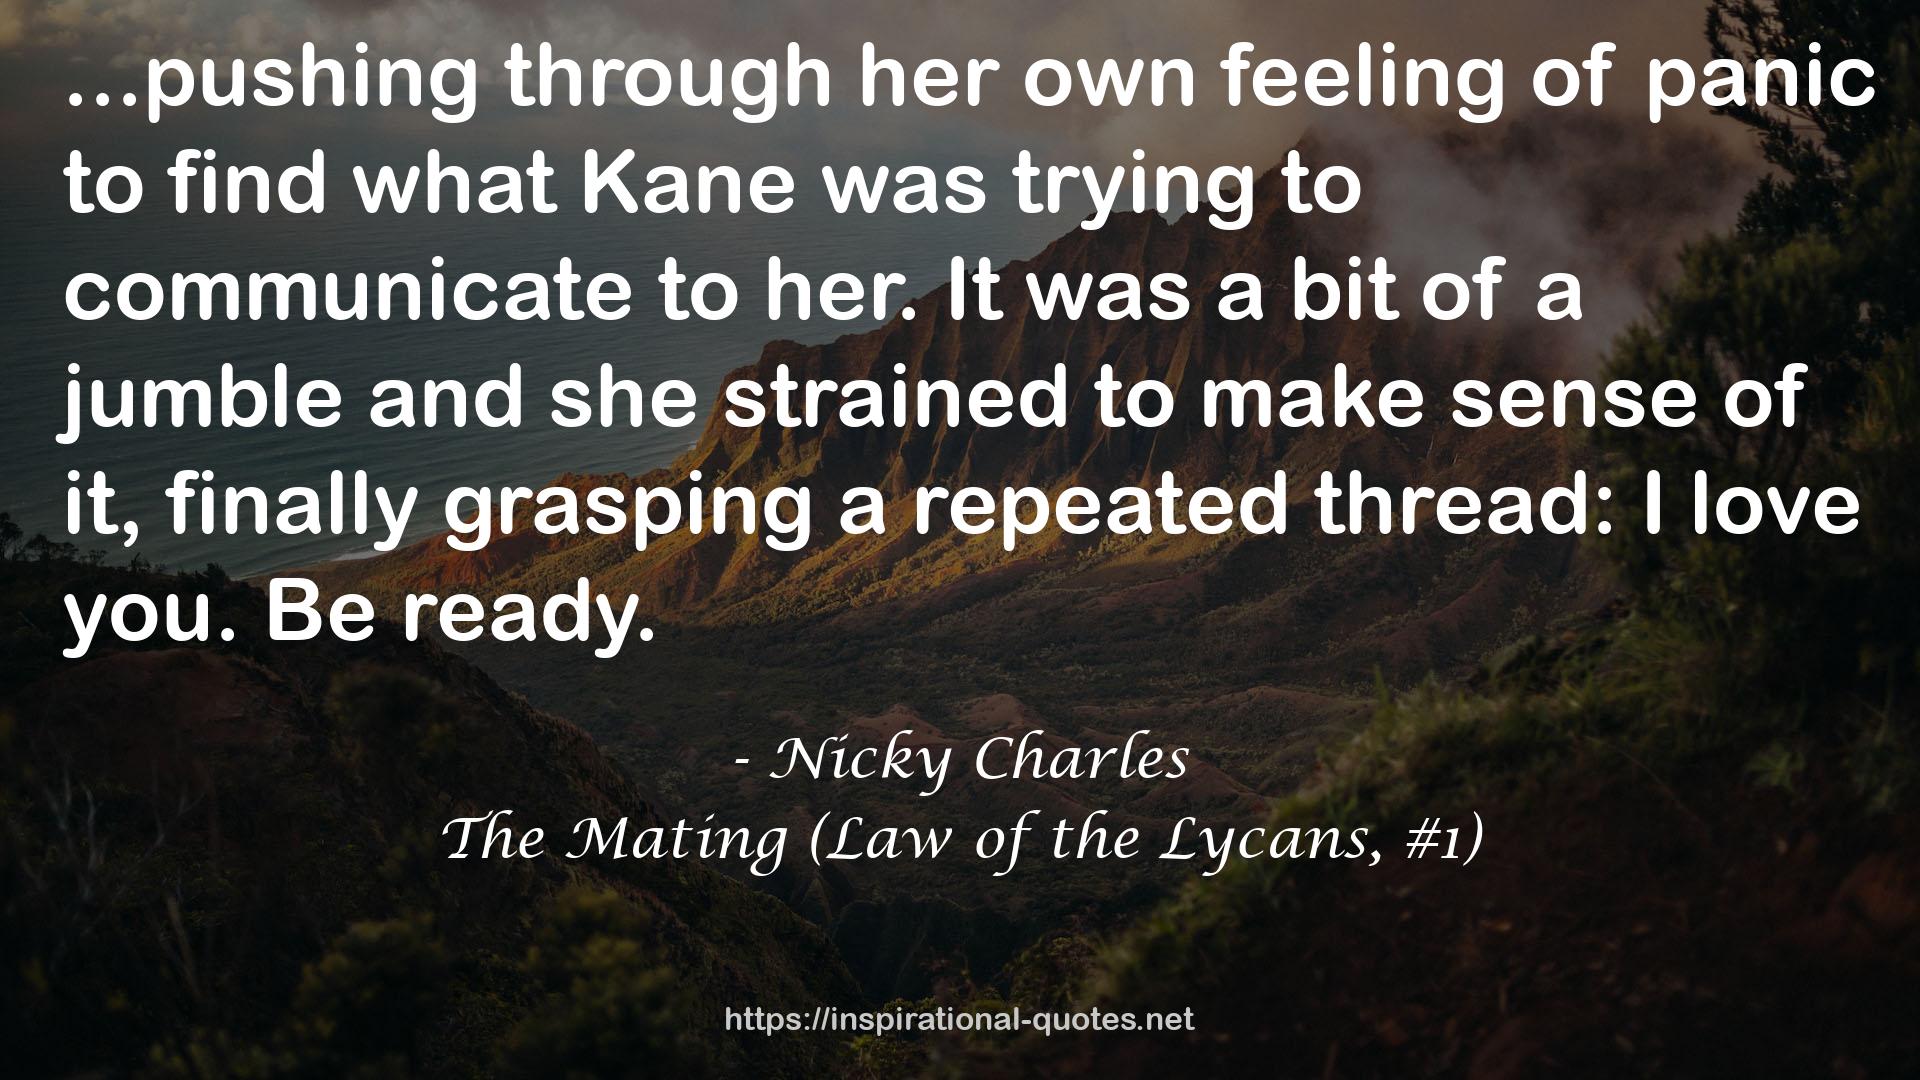 The Mating (Law of the Lycans, #1) QUOTES